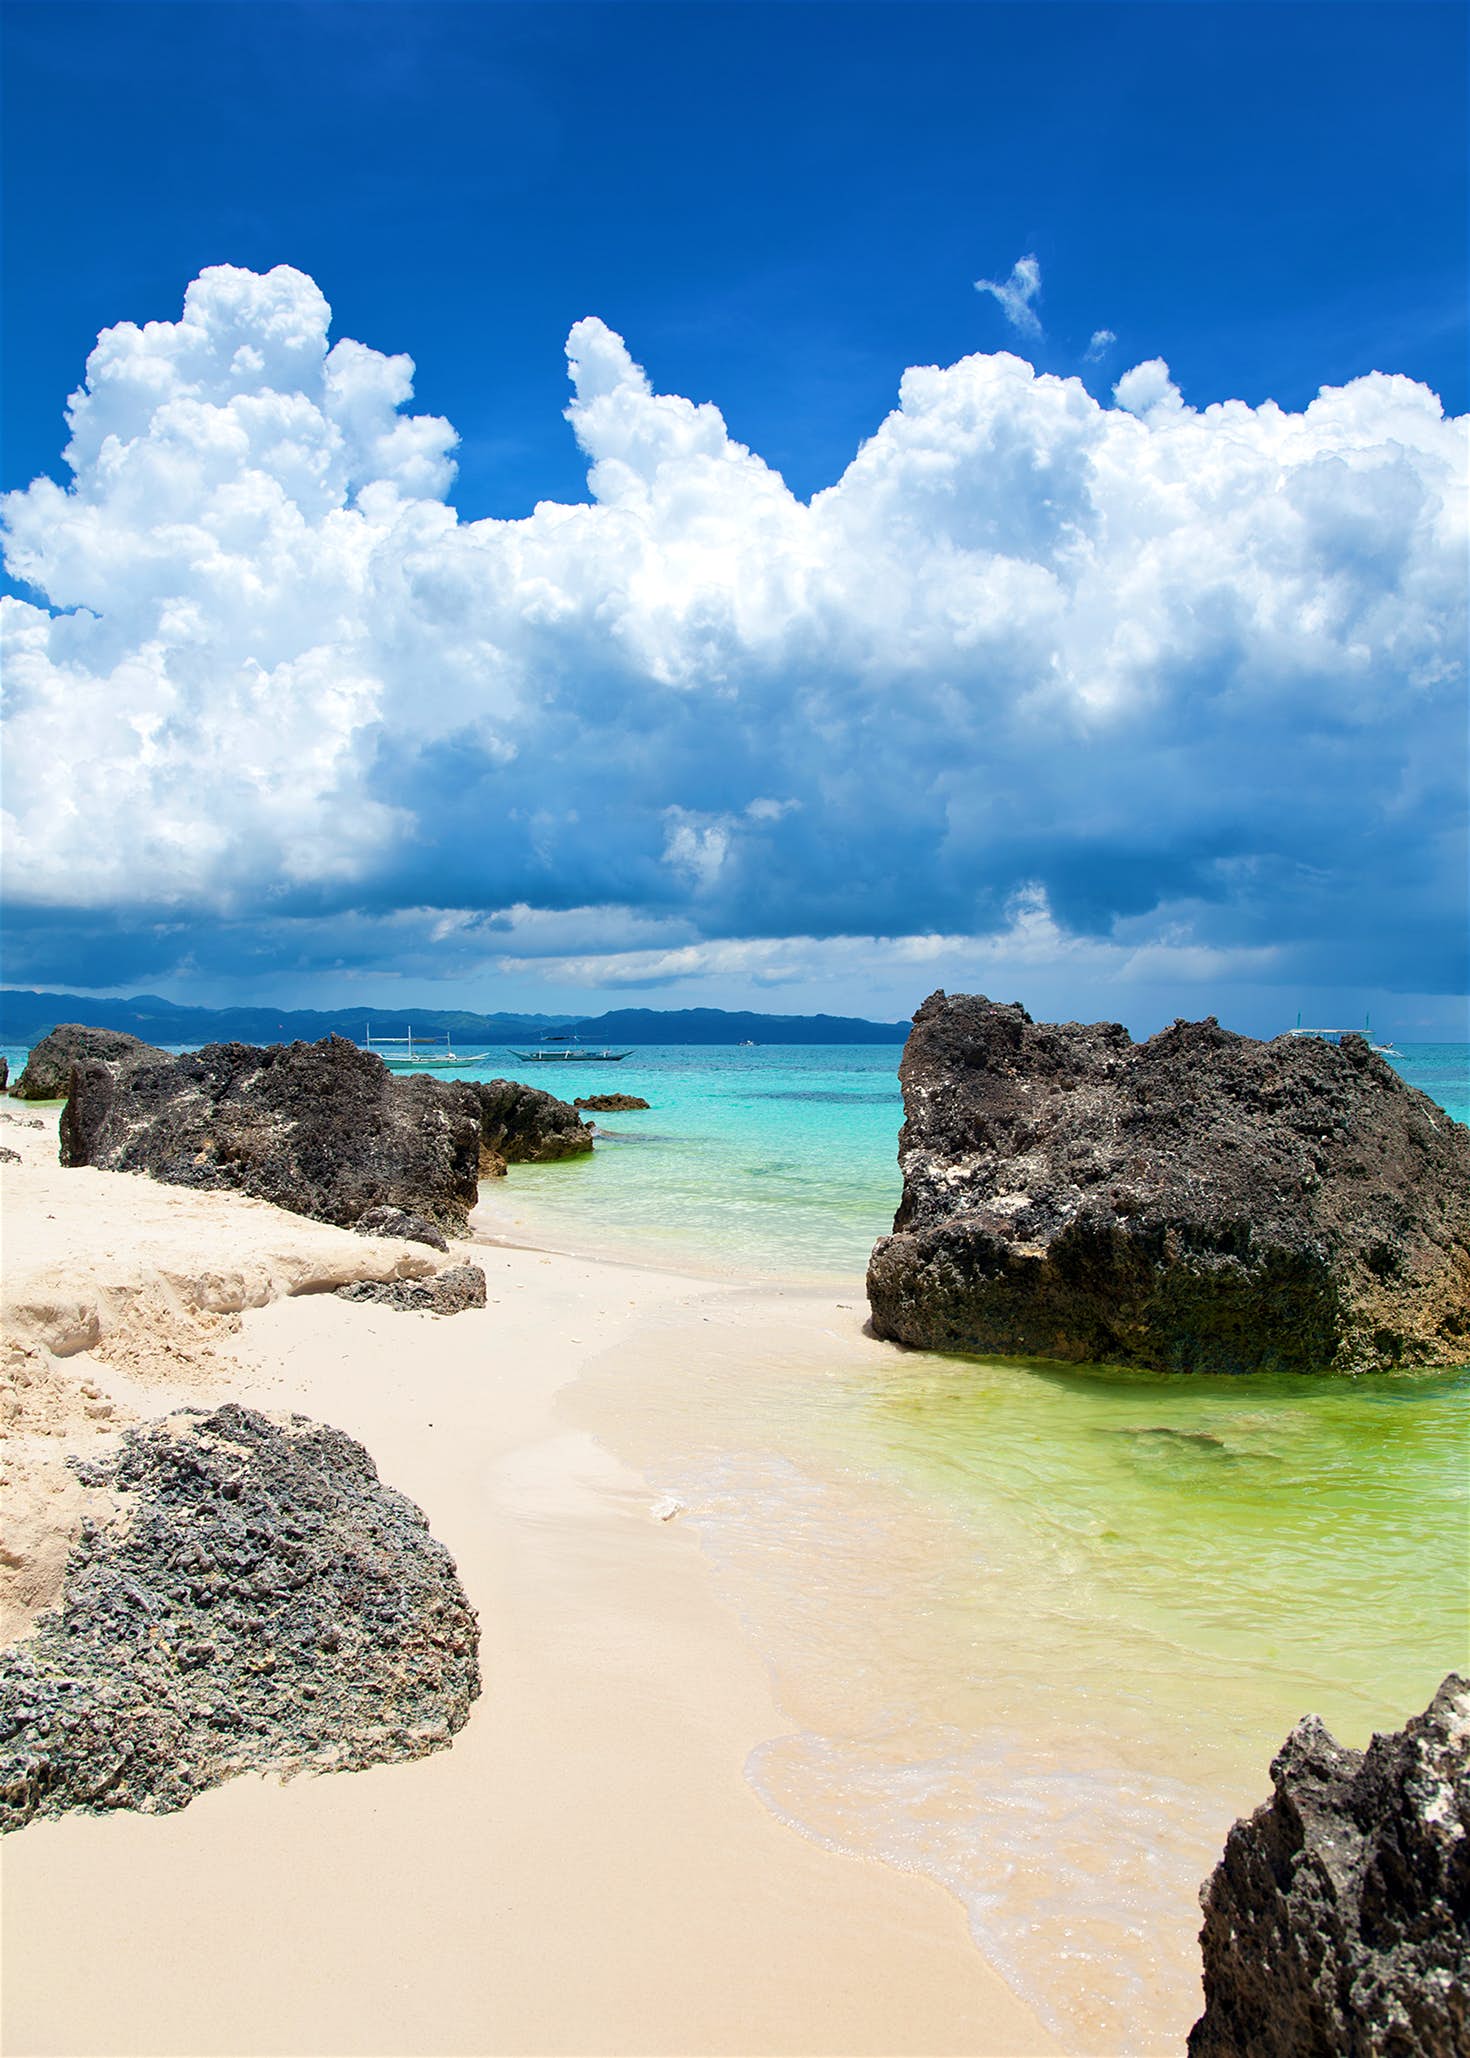 The best beaches of the Philippines